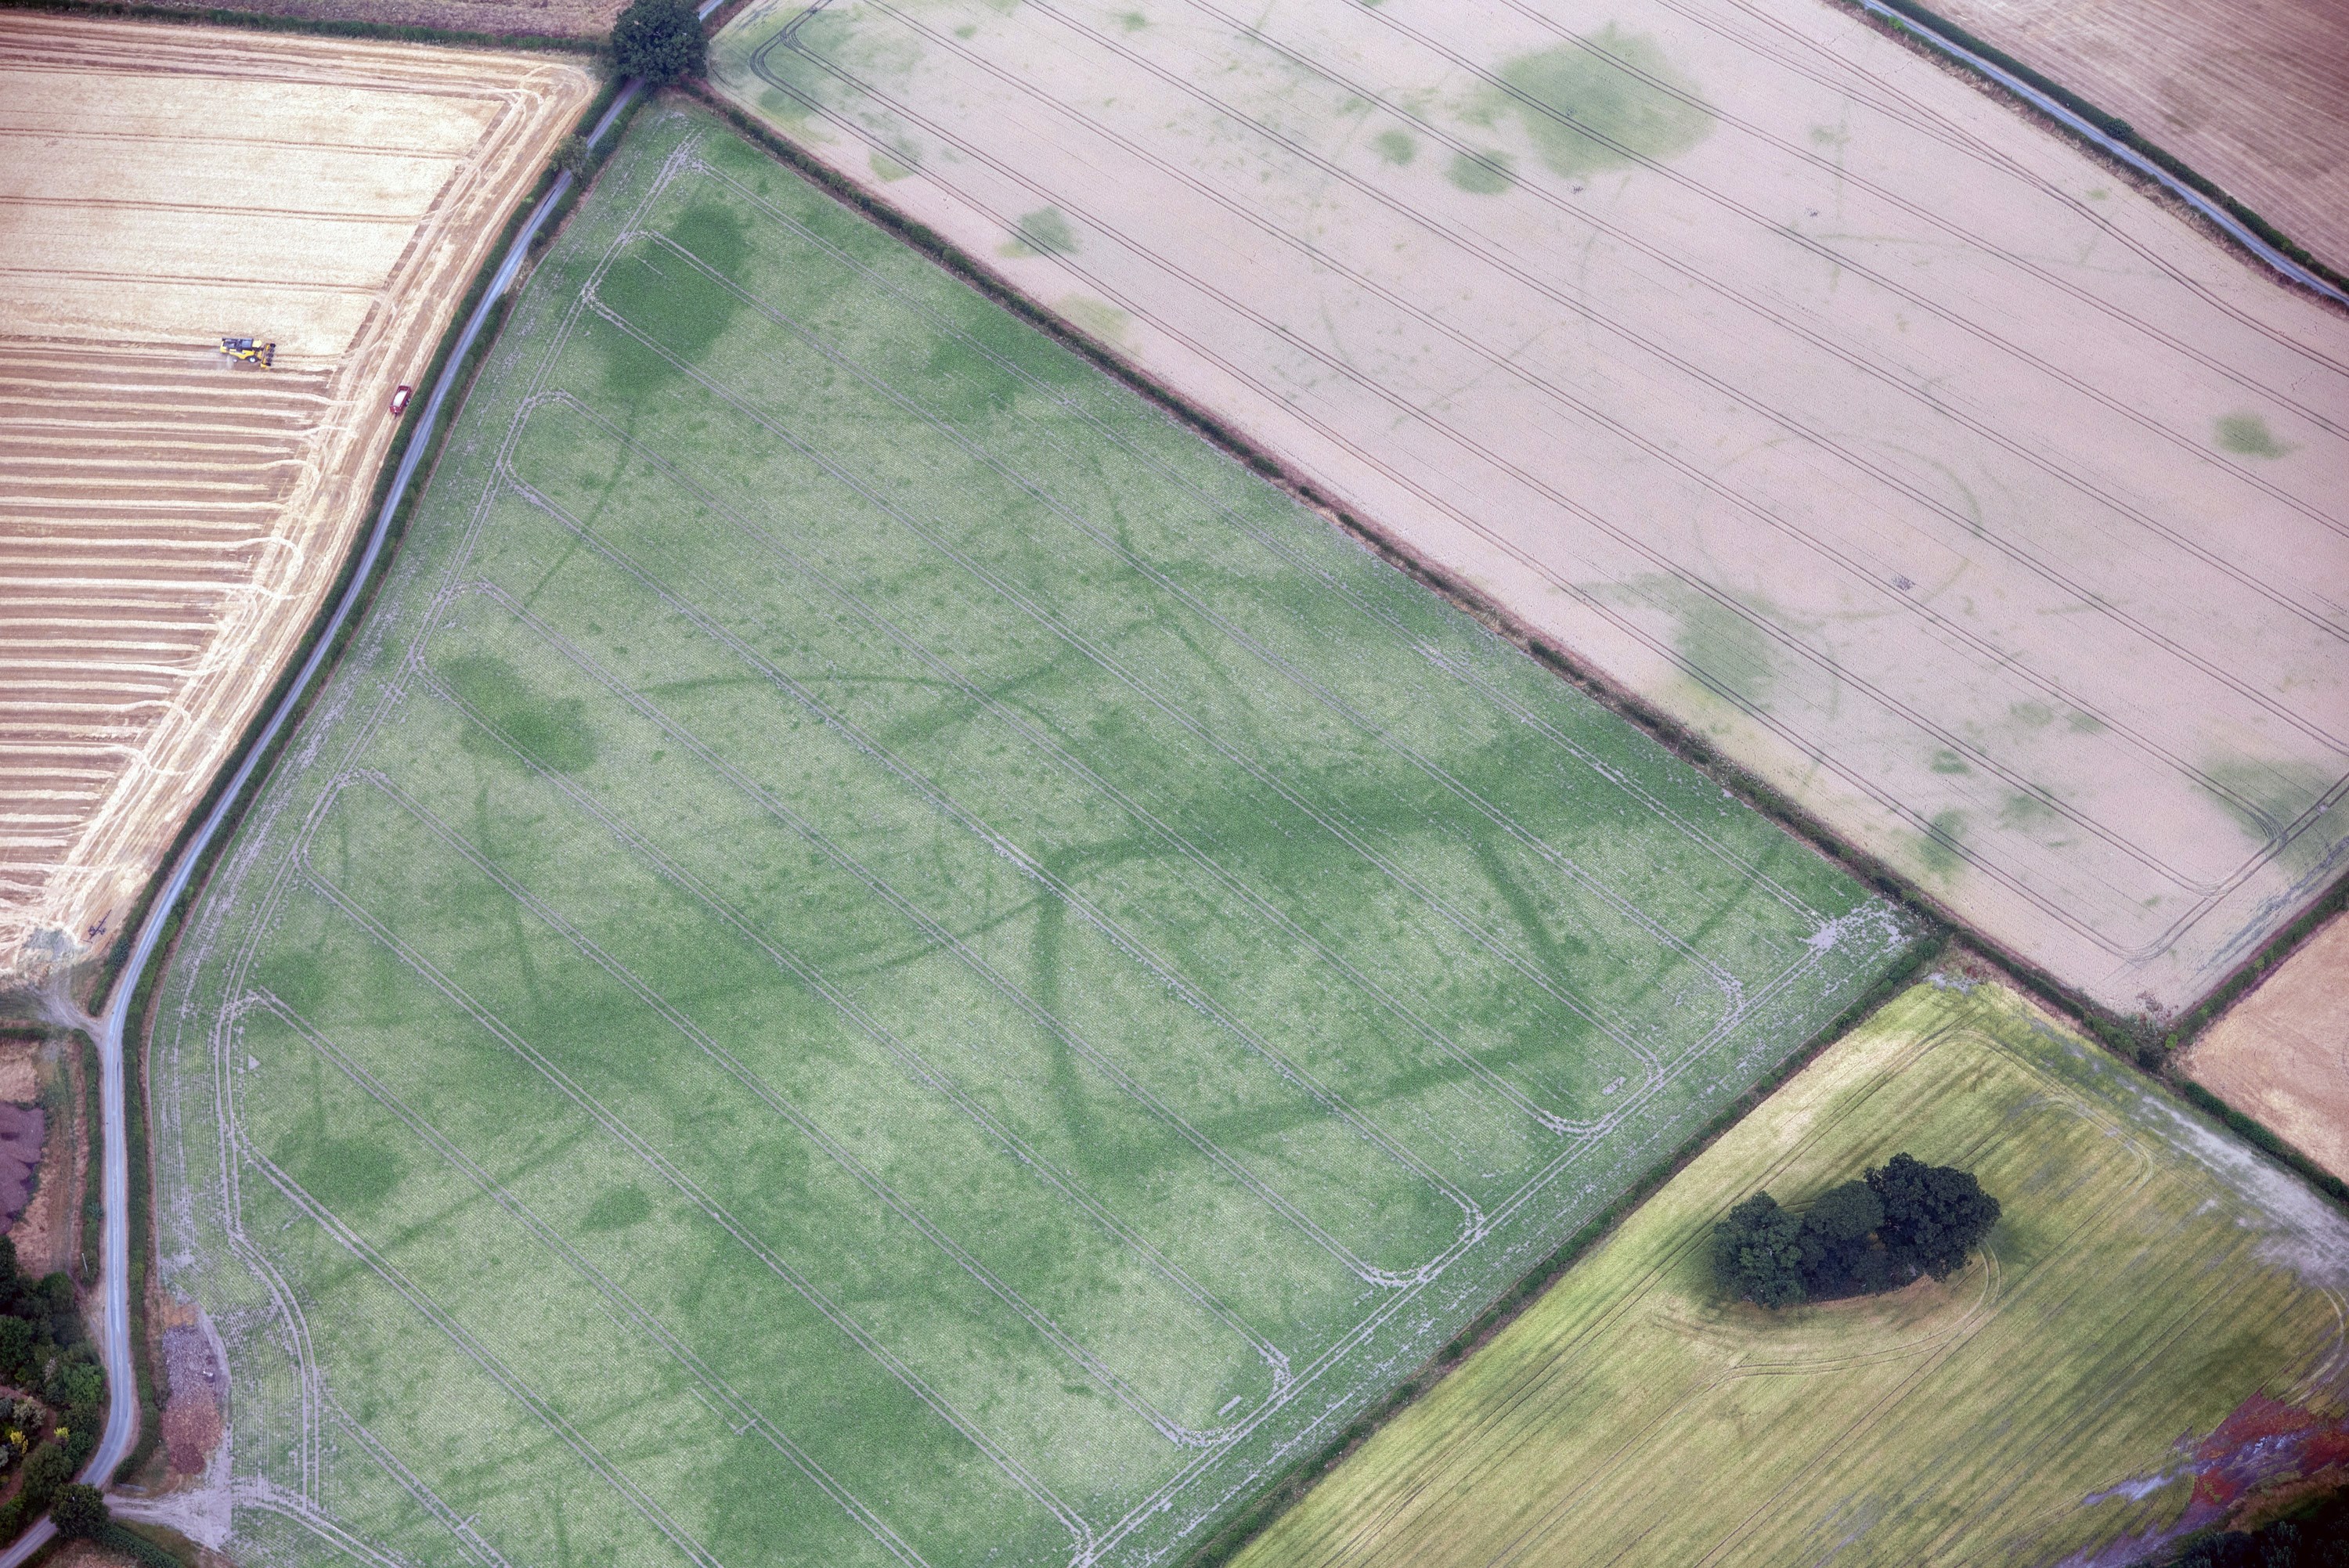 09_A series of features visible in a single aerial photograph near Whittington_SA1804_099